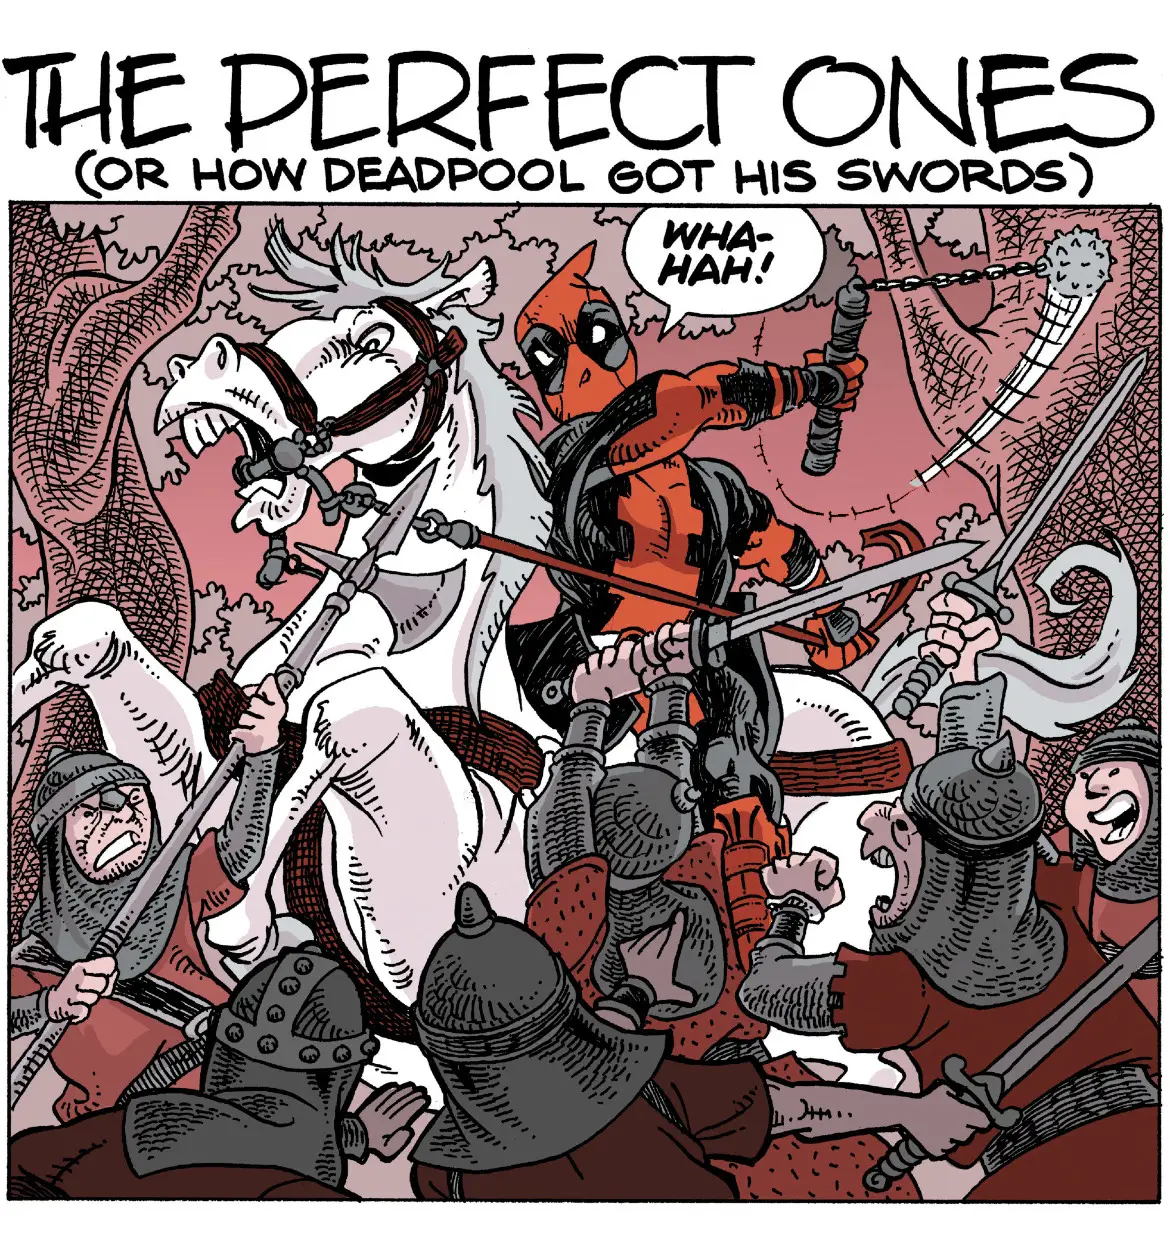 “The Perfect Ones”